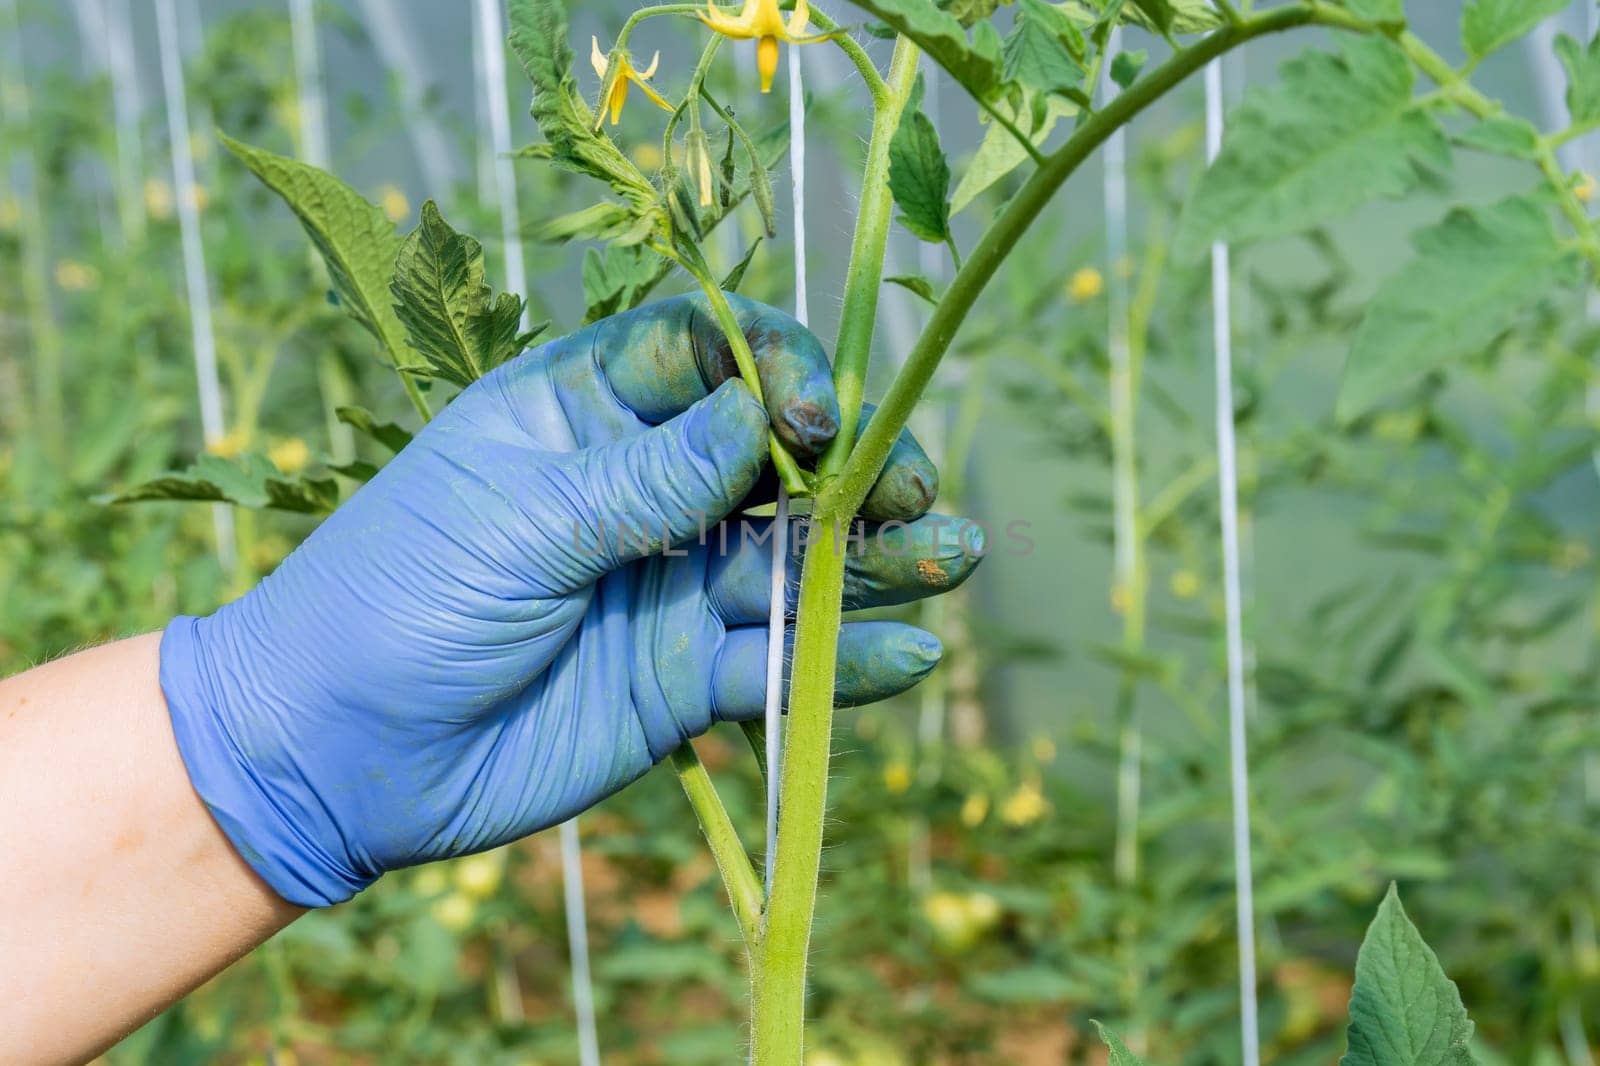 Removing tomato side shoots encourages plant to direct more energy towards fruit production. Tomatoes grown on trellises are easier to manage and harvest.